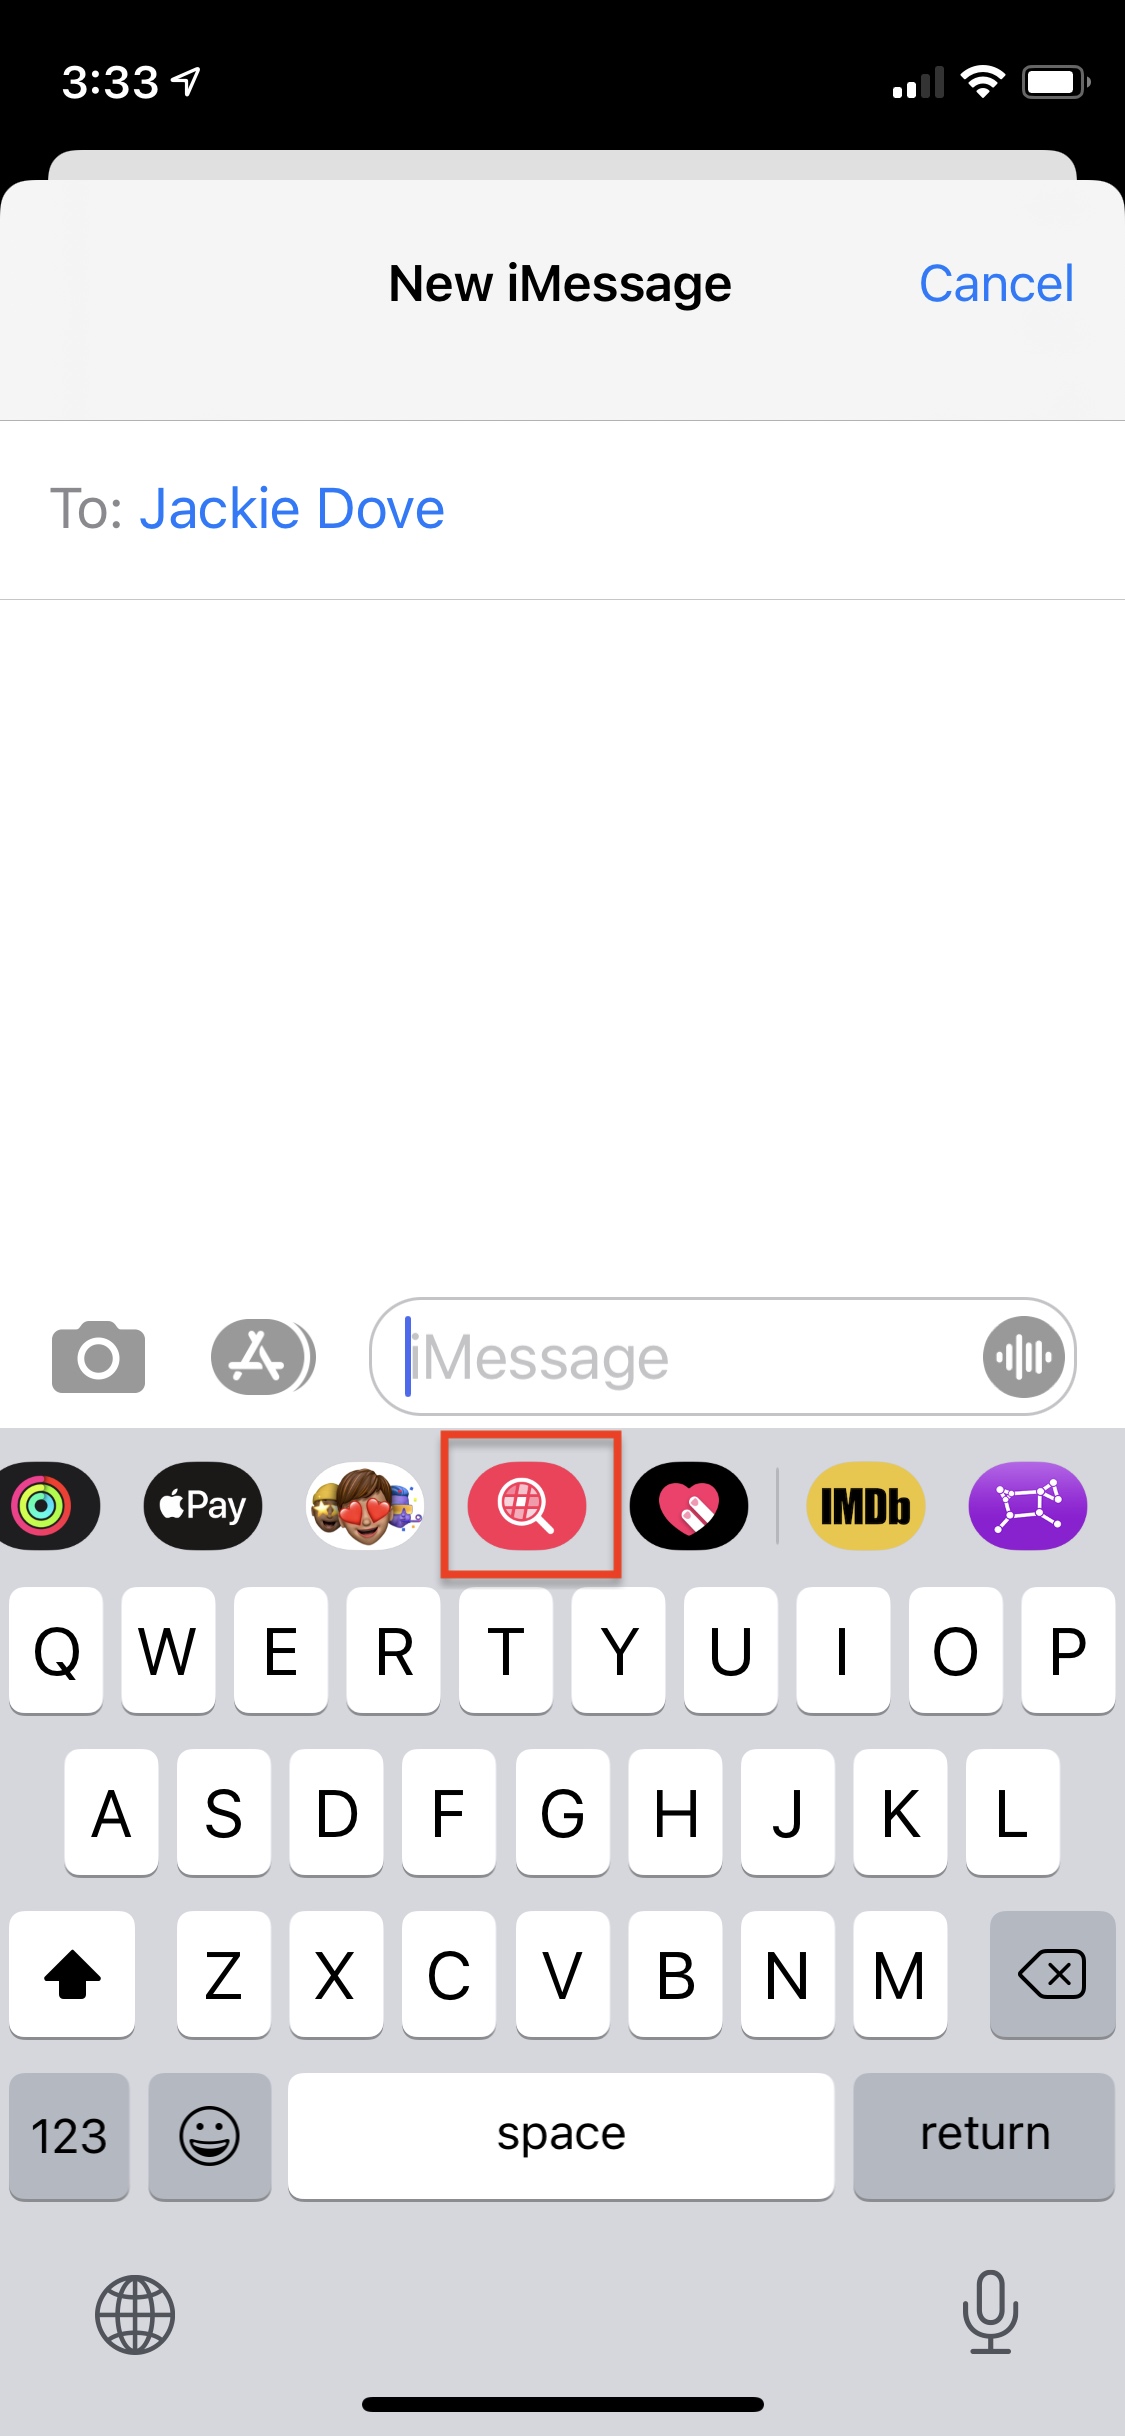 How to Make a GIF on iPhone and iPad (2022)